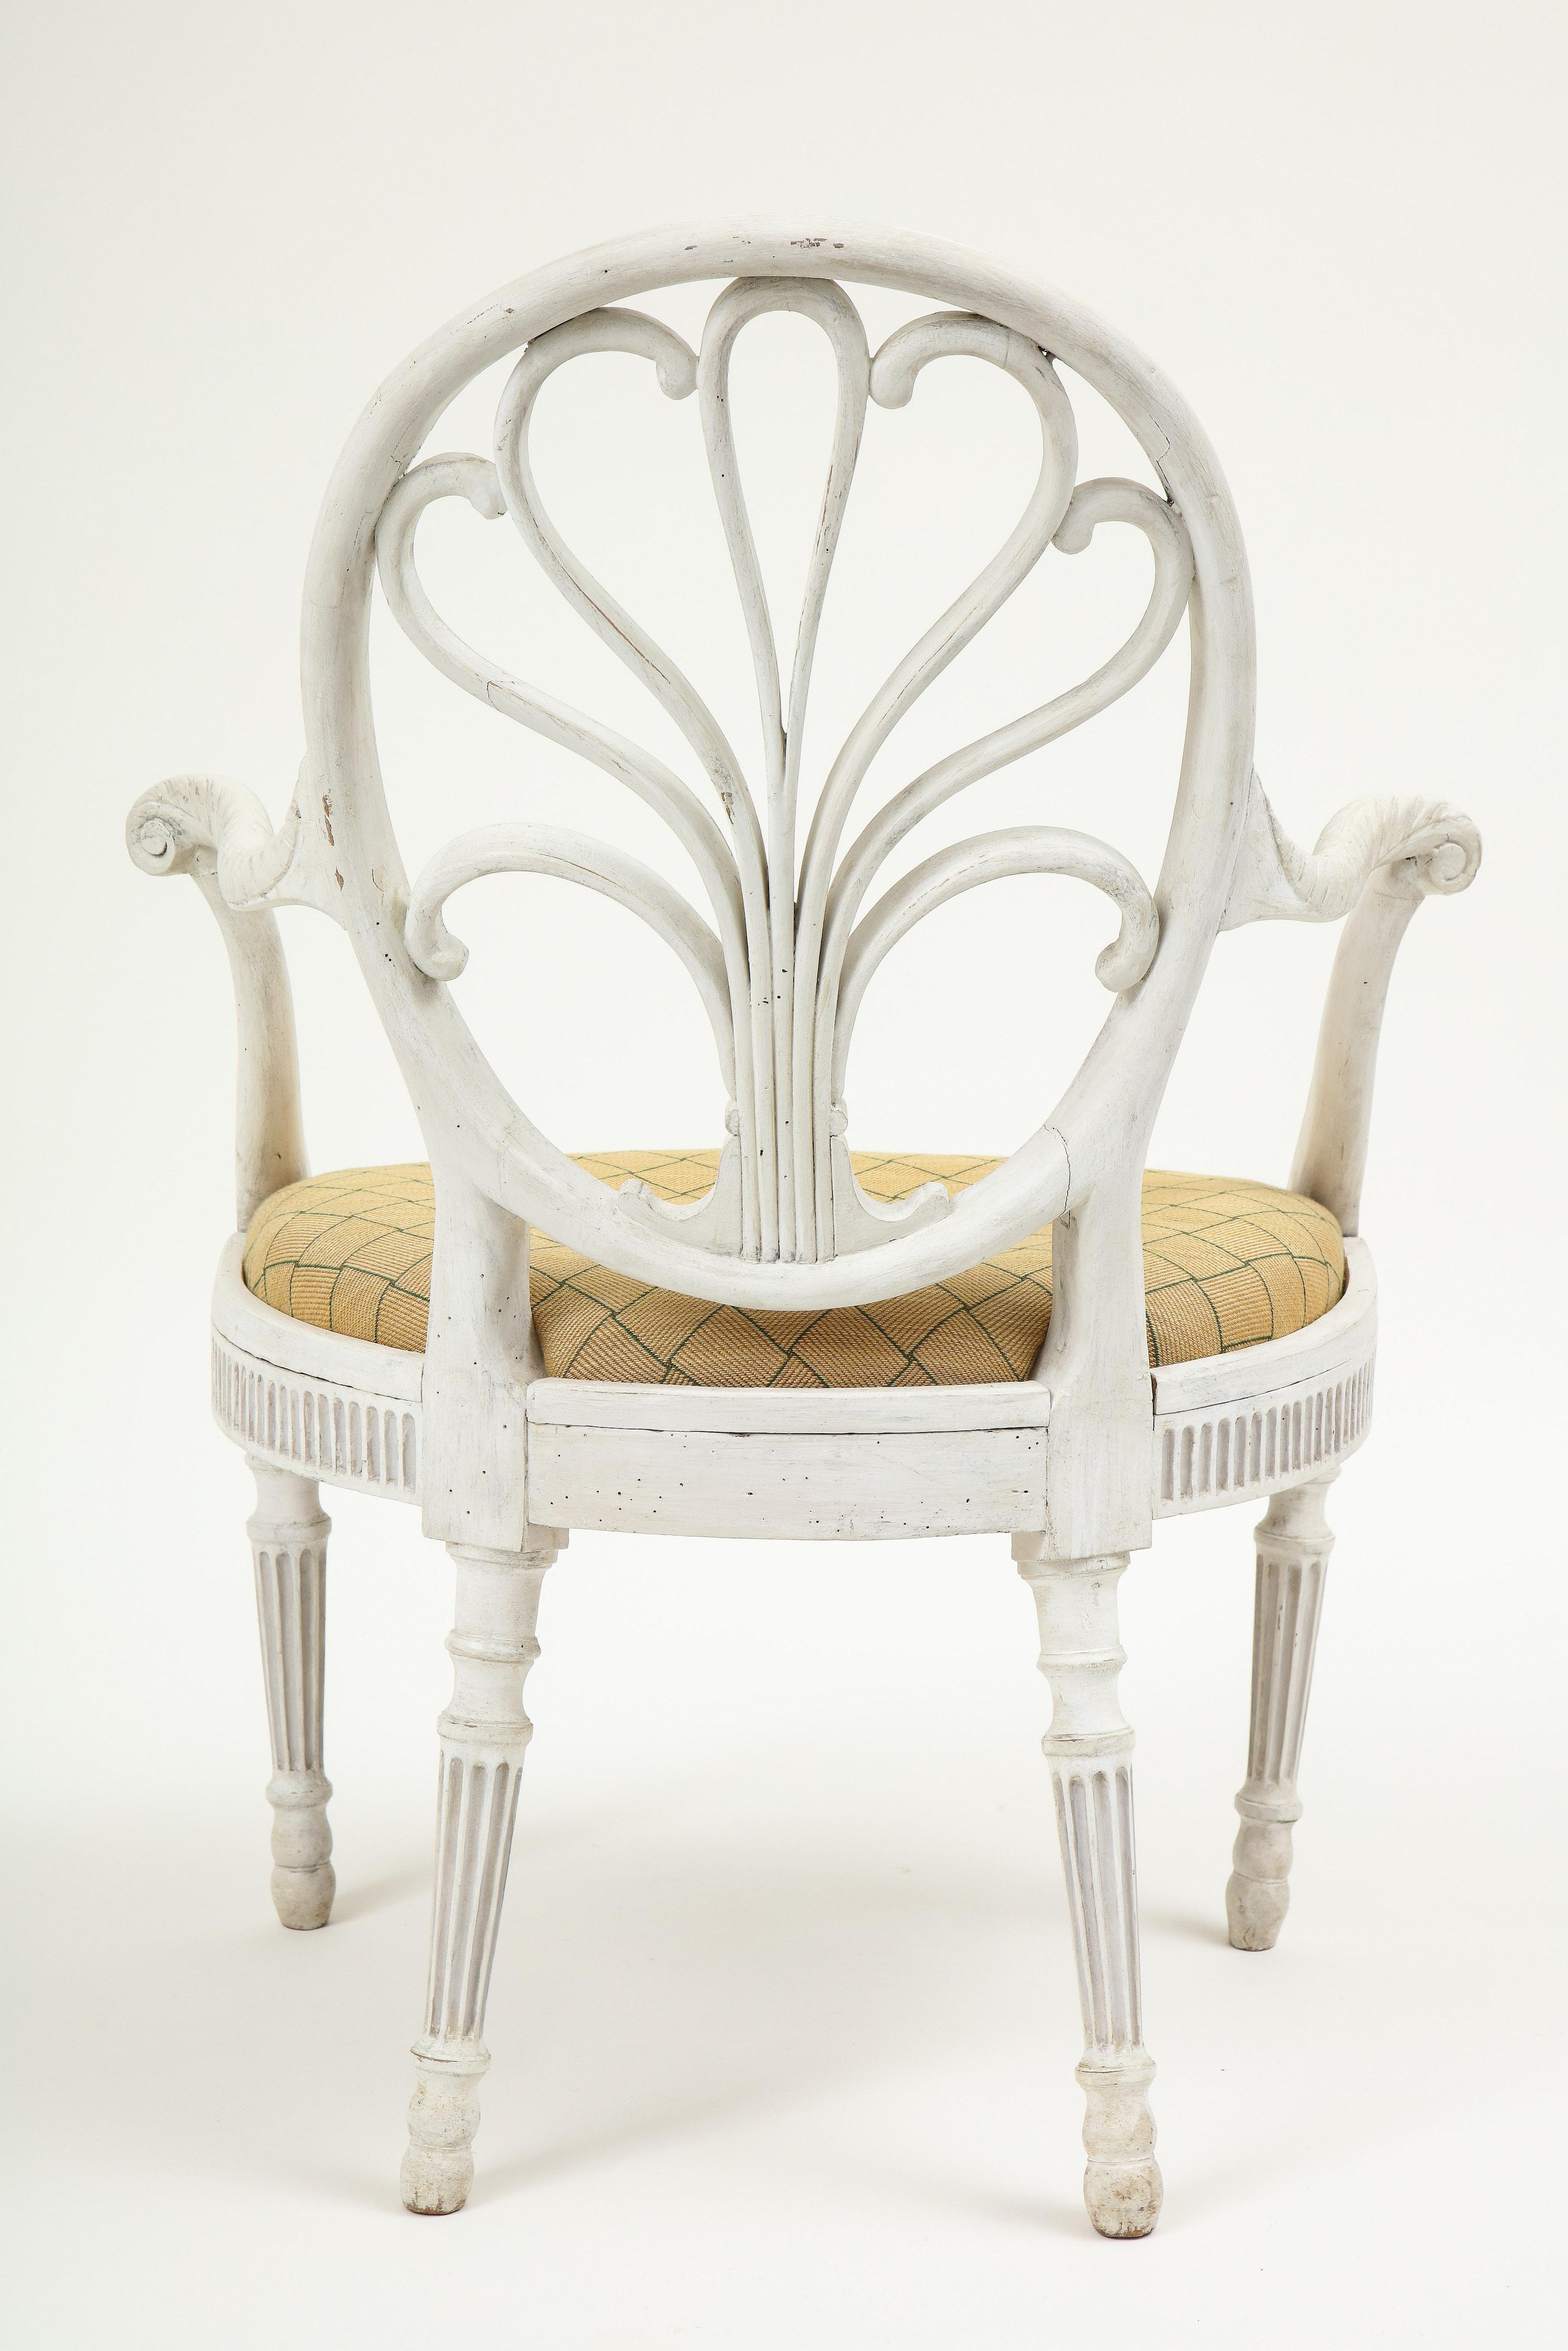 English George III White-Painted Armchair Attributed to Gillows